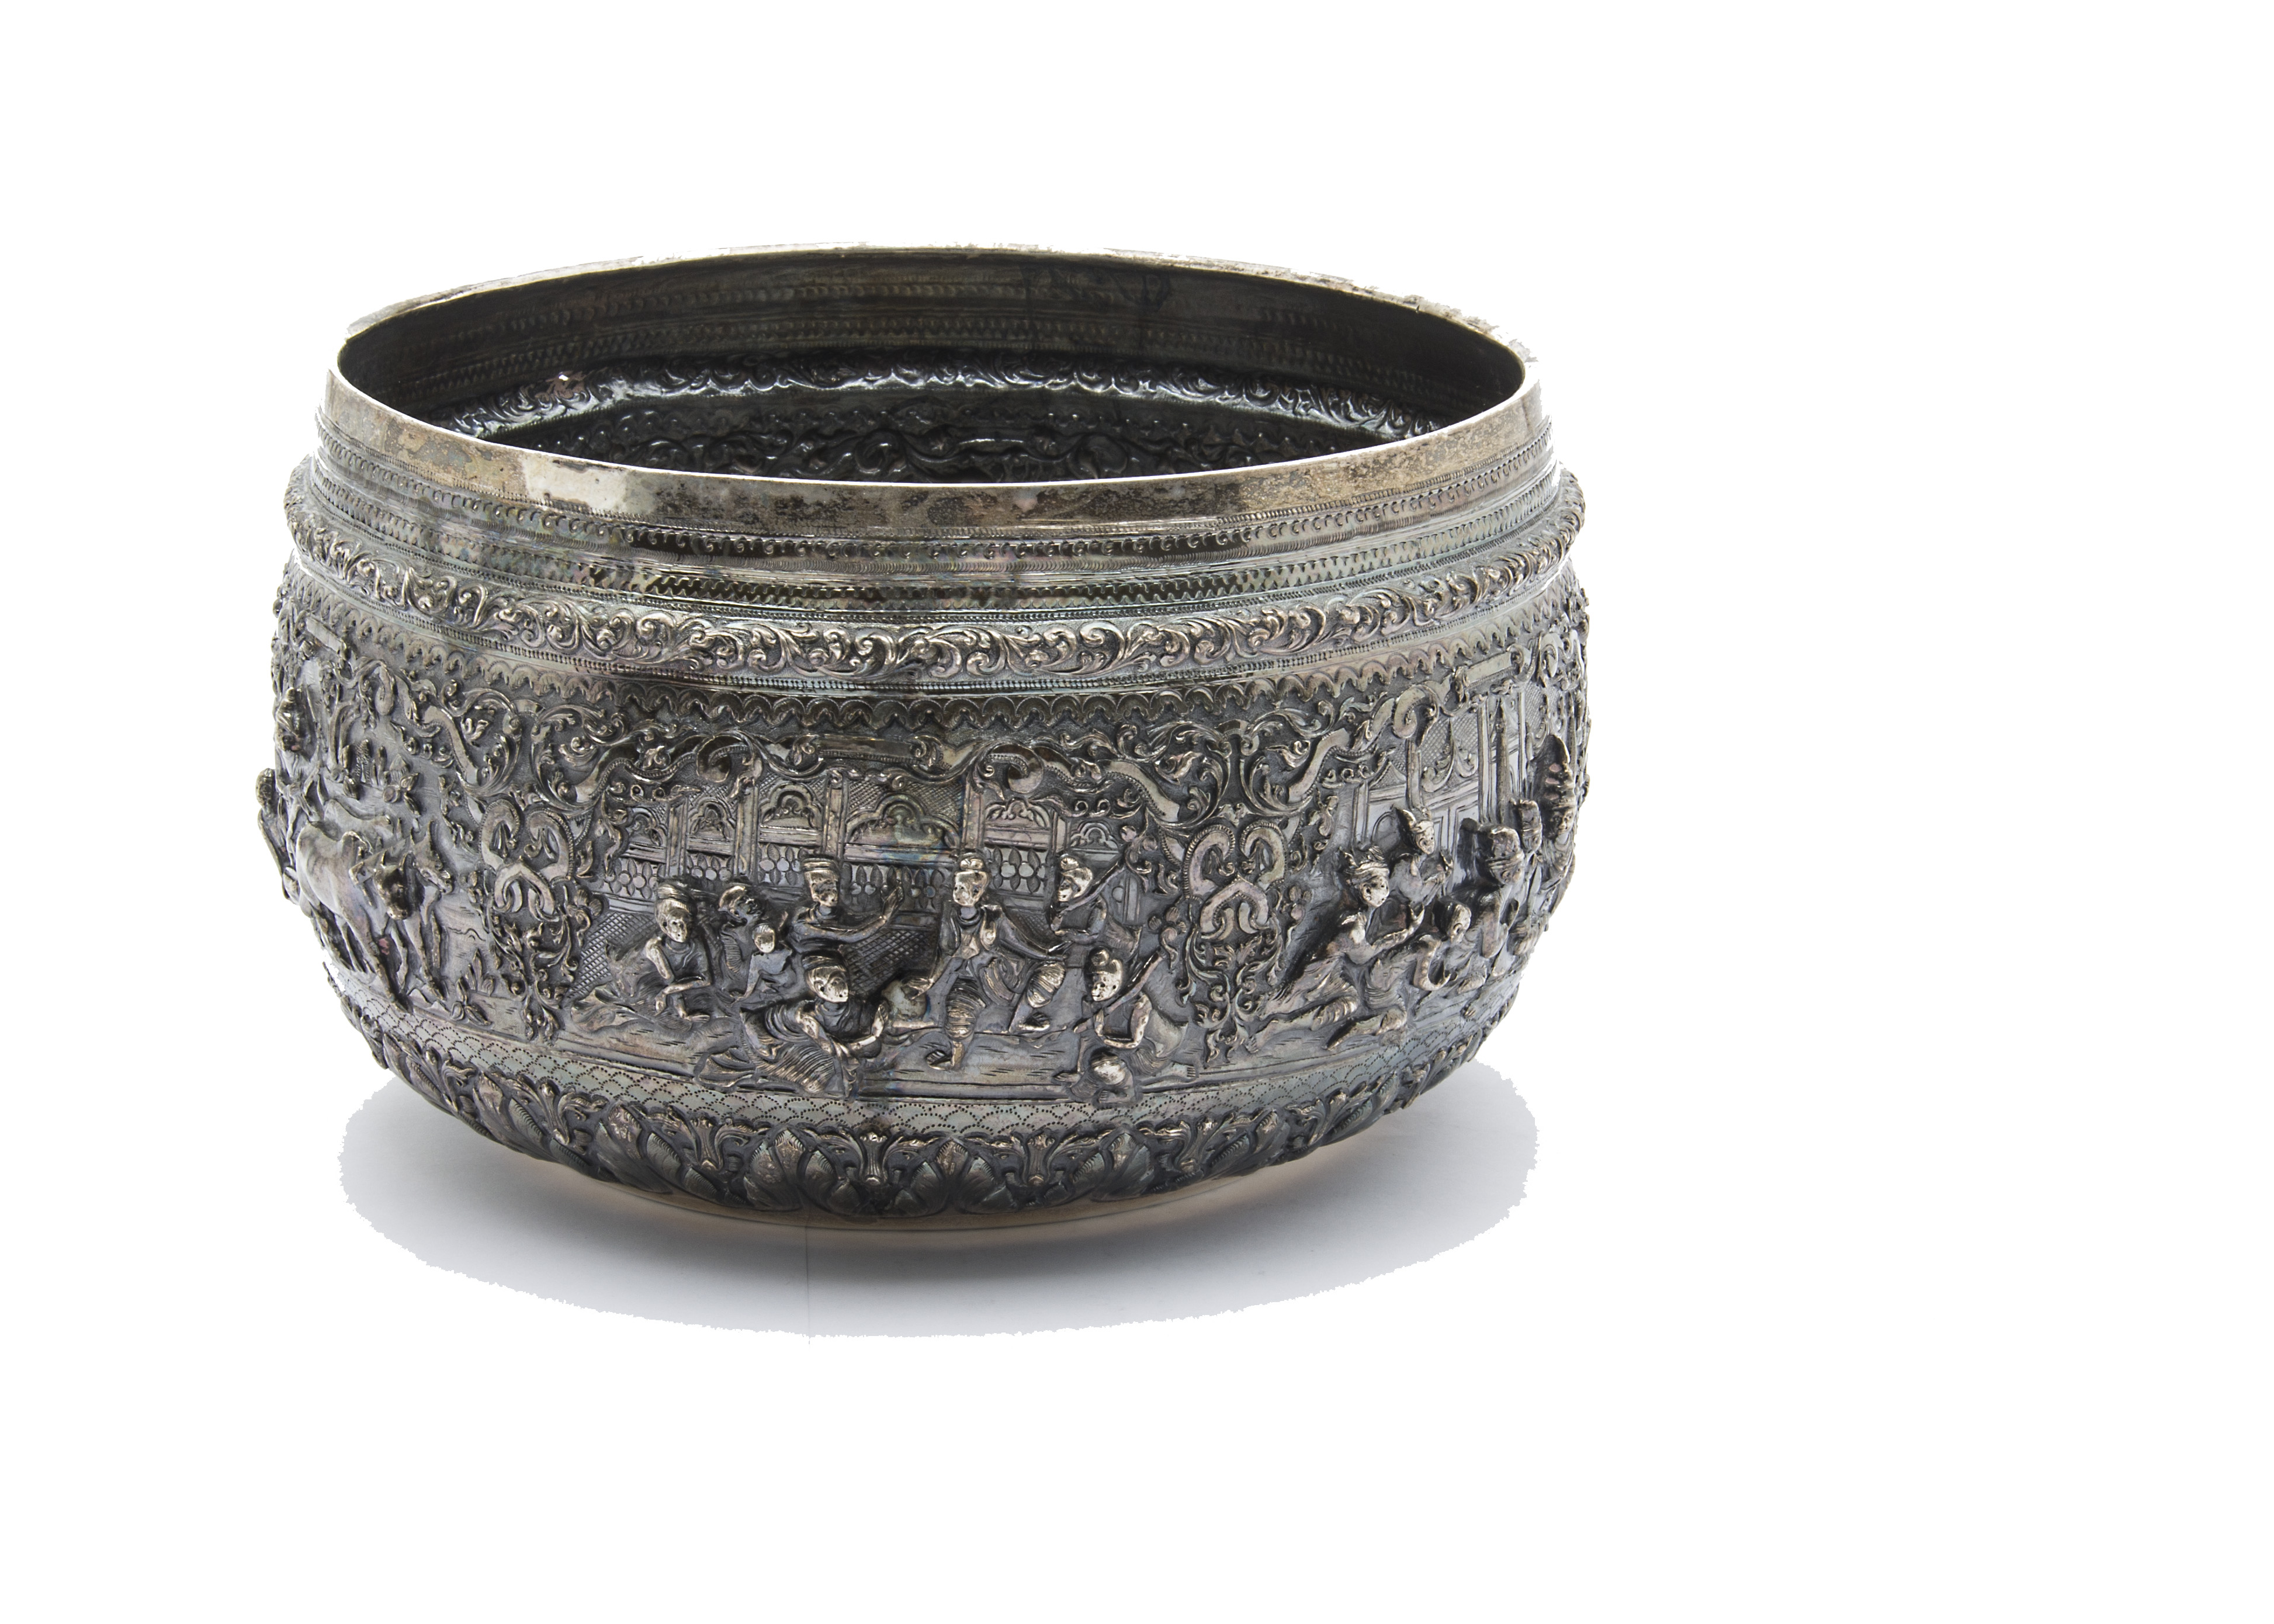 A large 19th century Indian silver bowl, having intricate embossed scenes of figures with ornate - Image 3 of 4